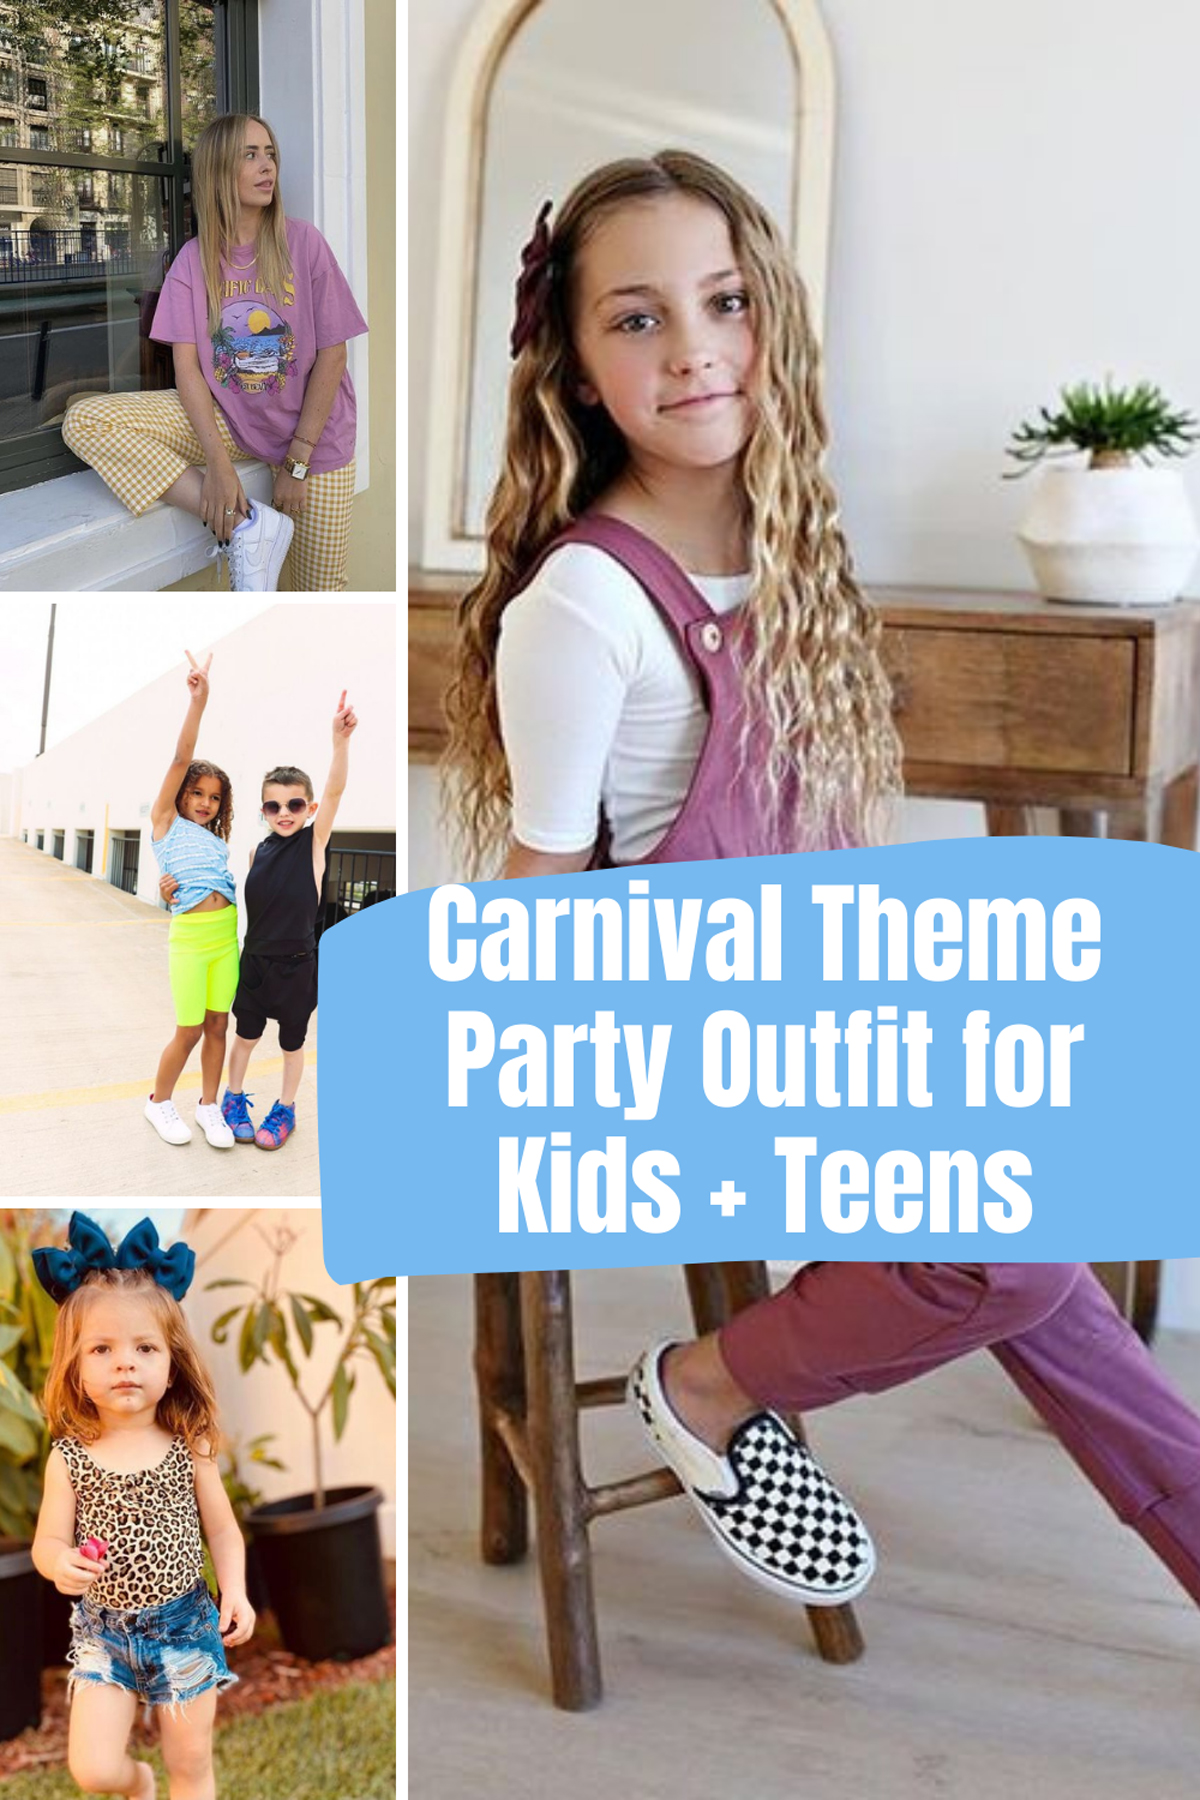 anthony modlin recommends Cute Outfits To Wear To A Carnival